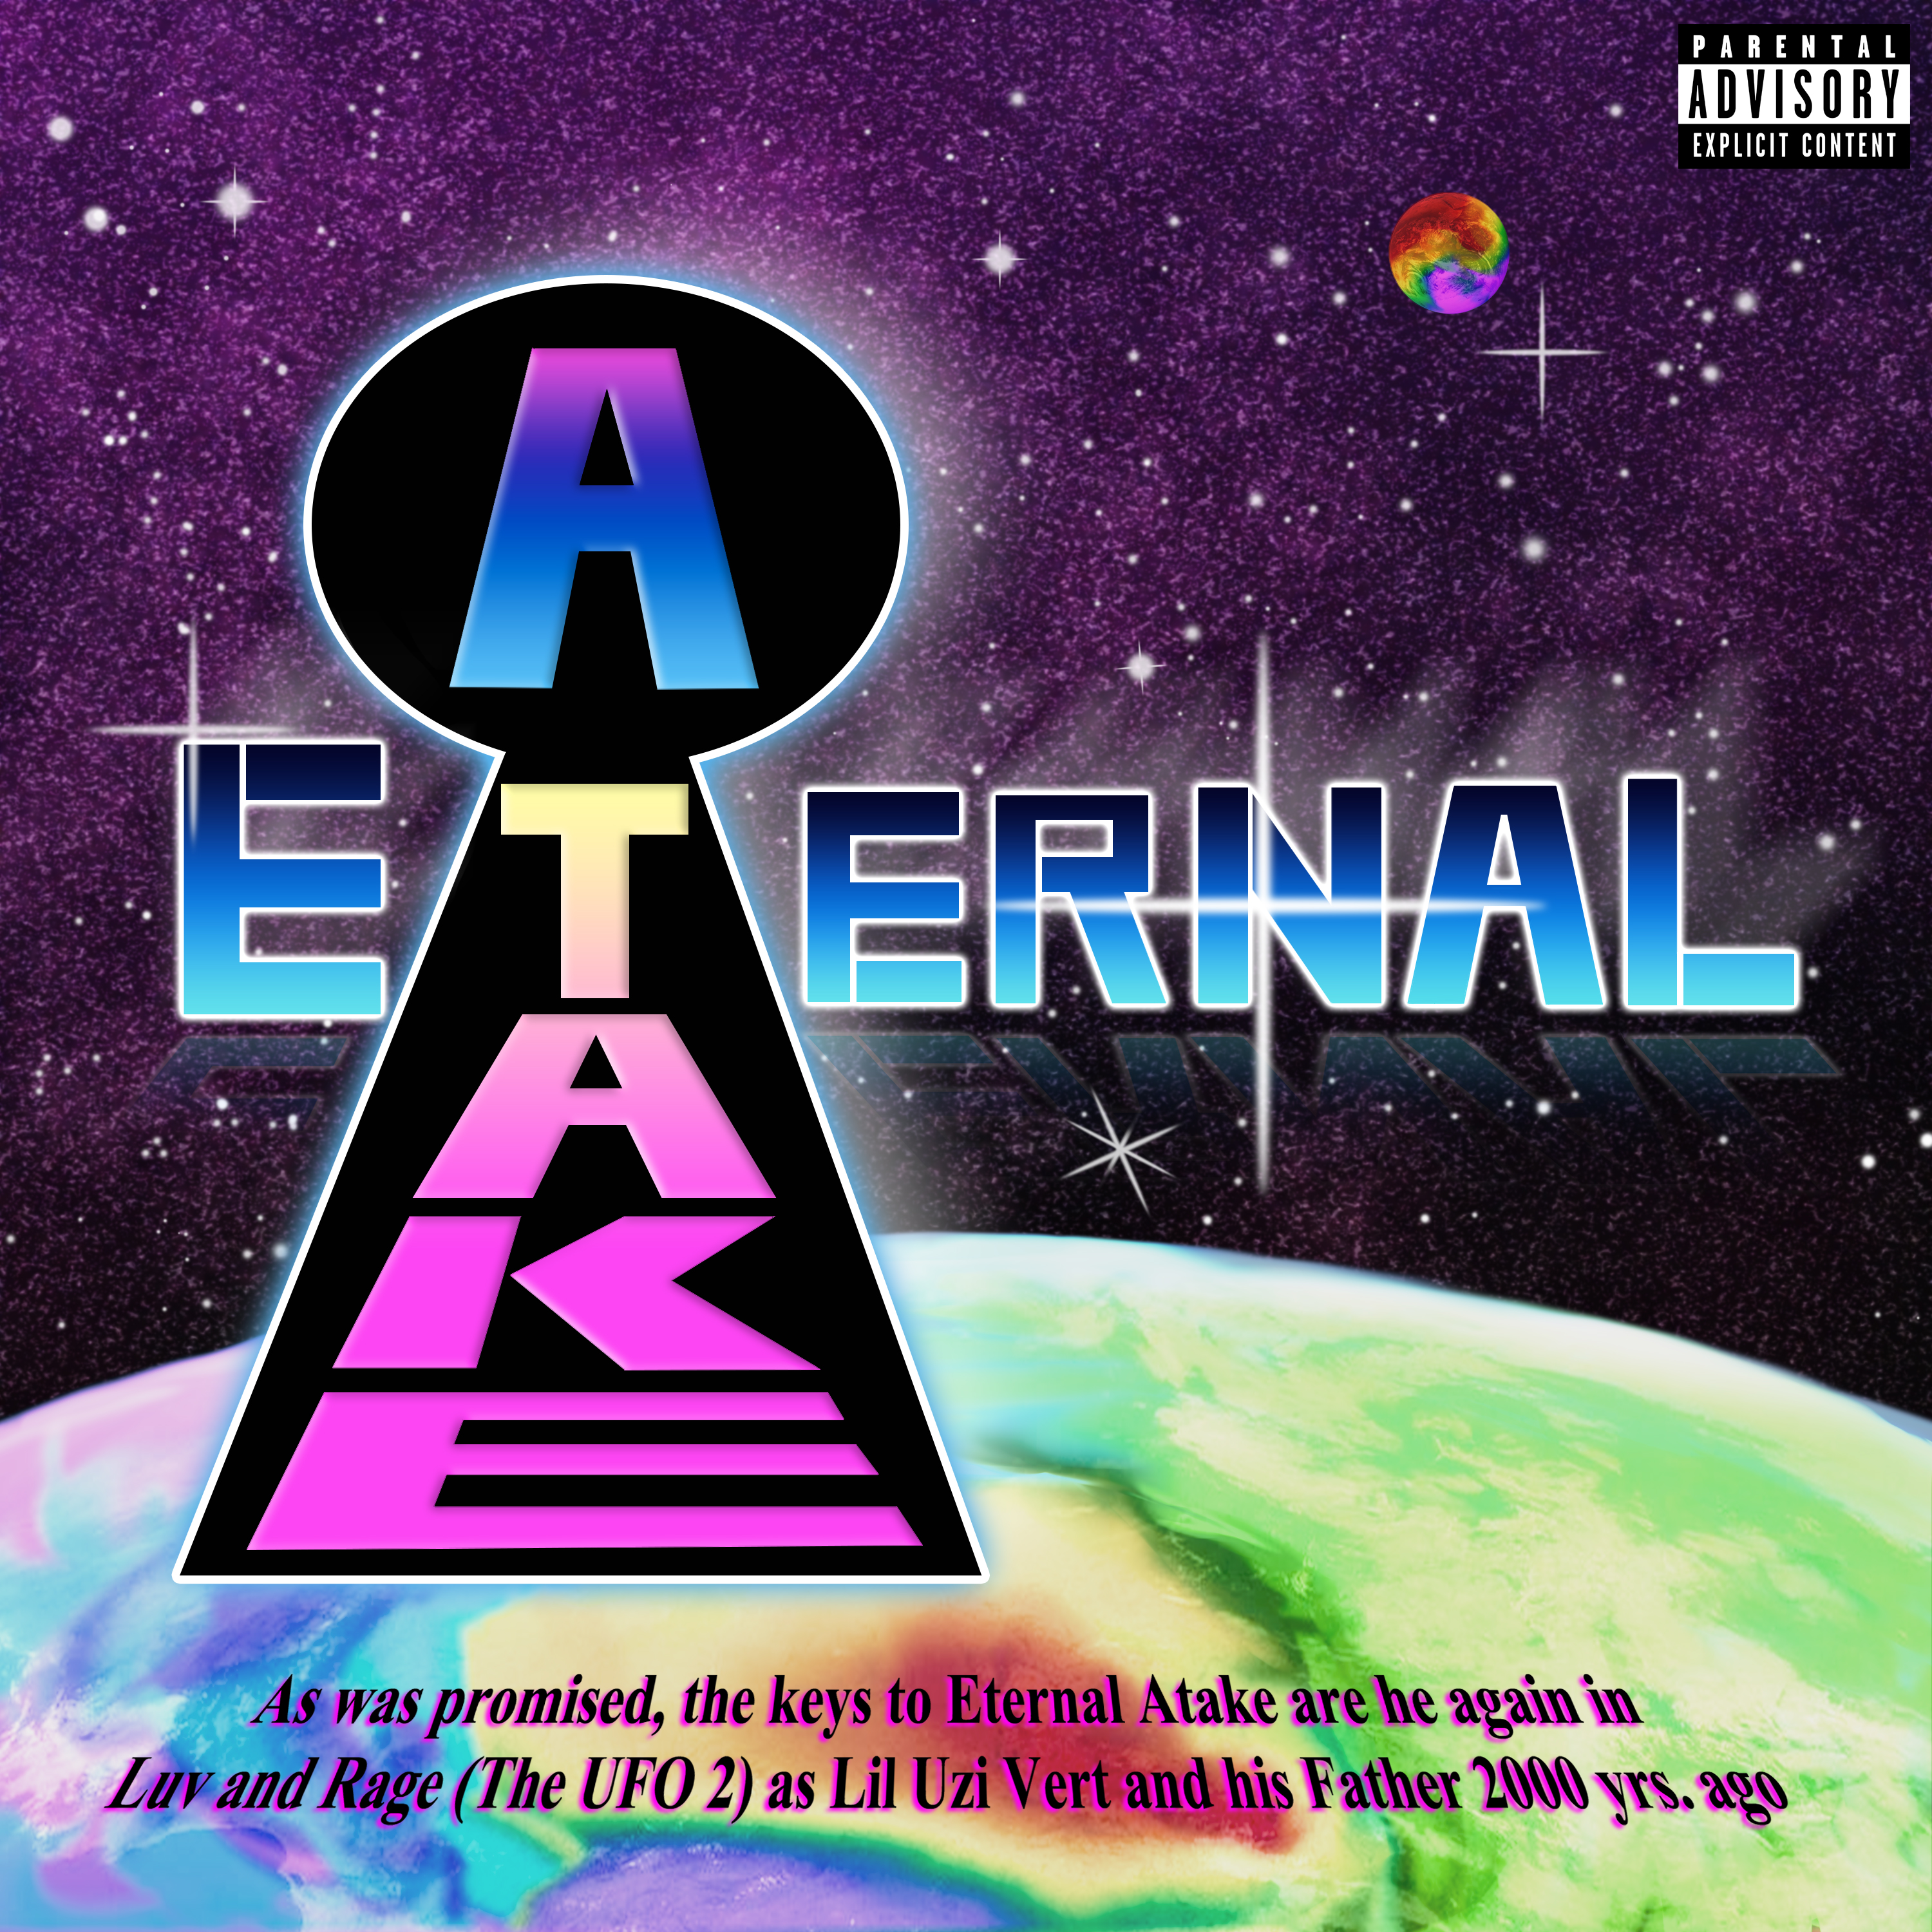 My remake of LilUziVert's Eternal Atake Cover in 3000x3000